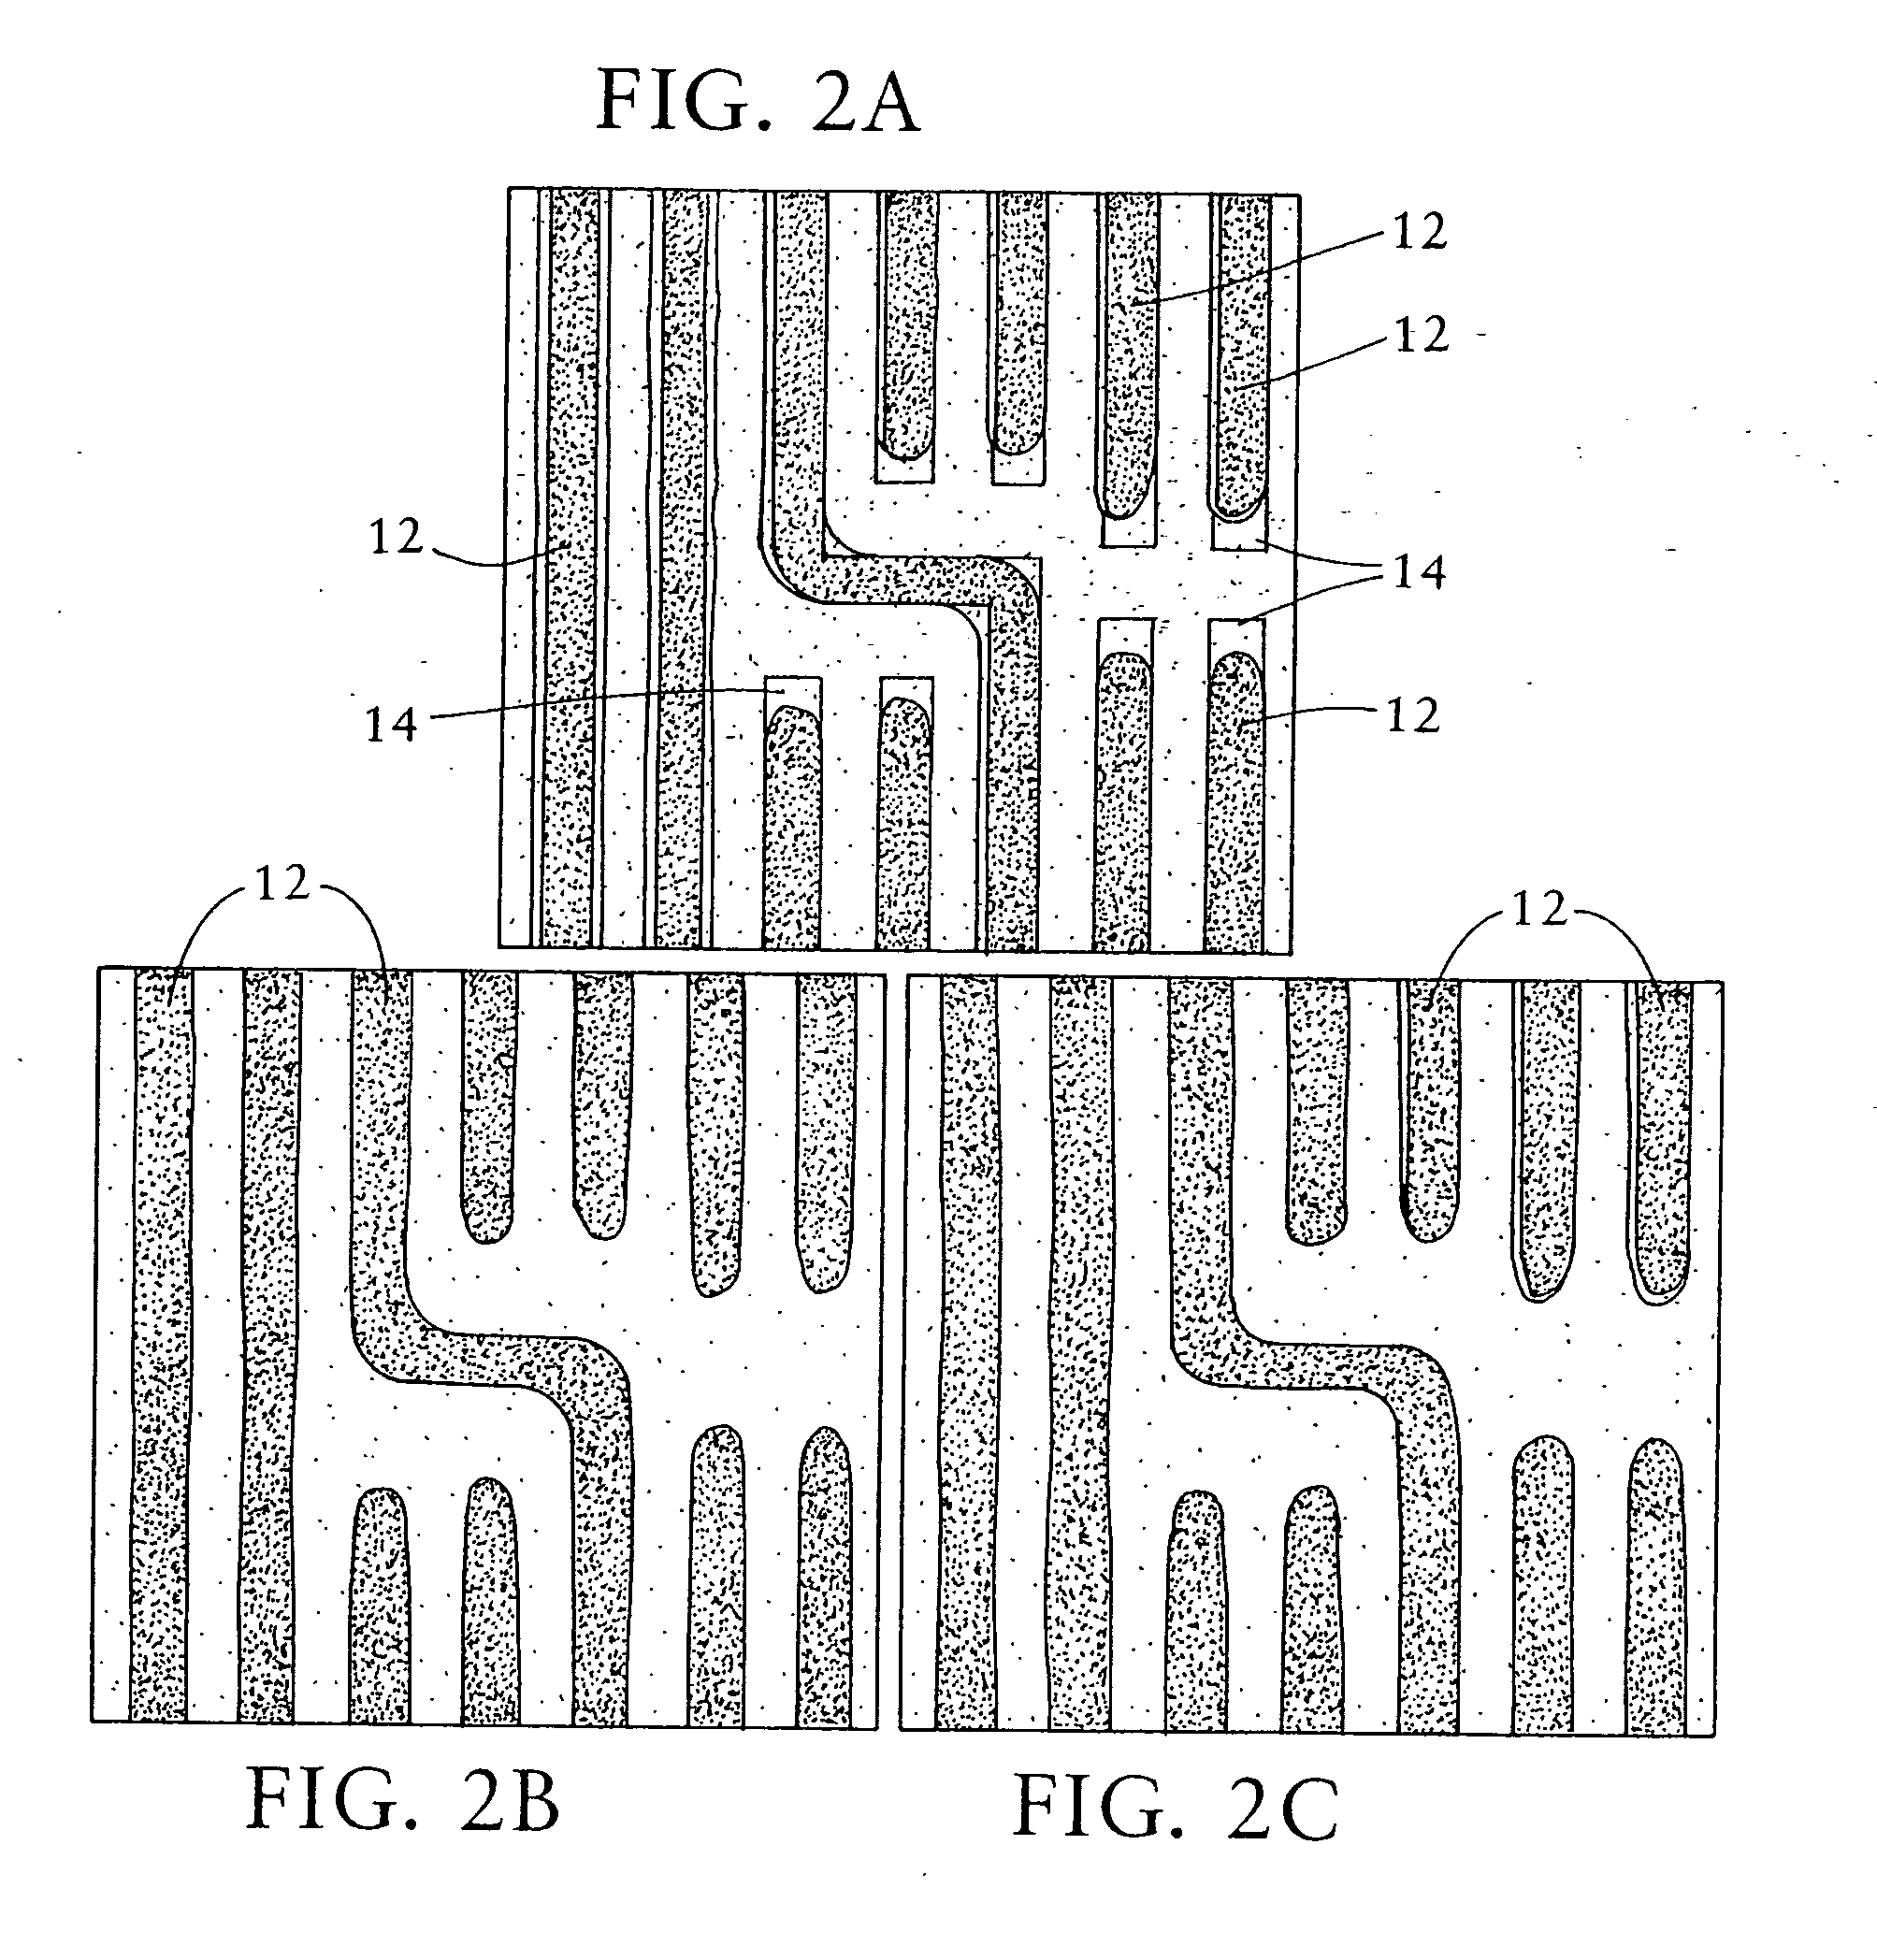 Method of two dimensional feature model calibration and optimization